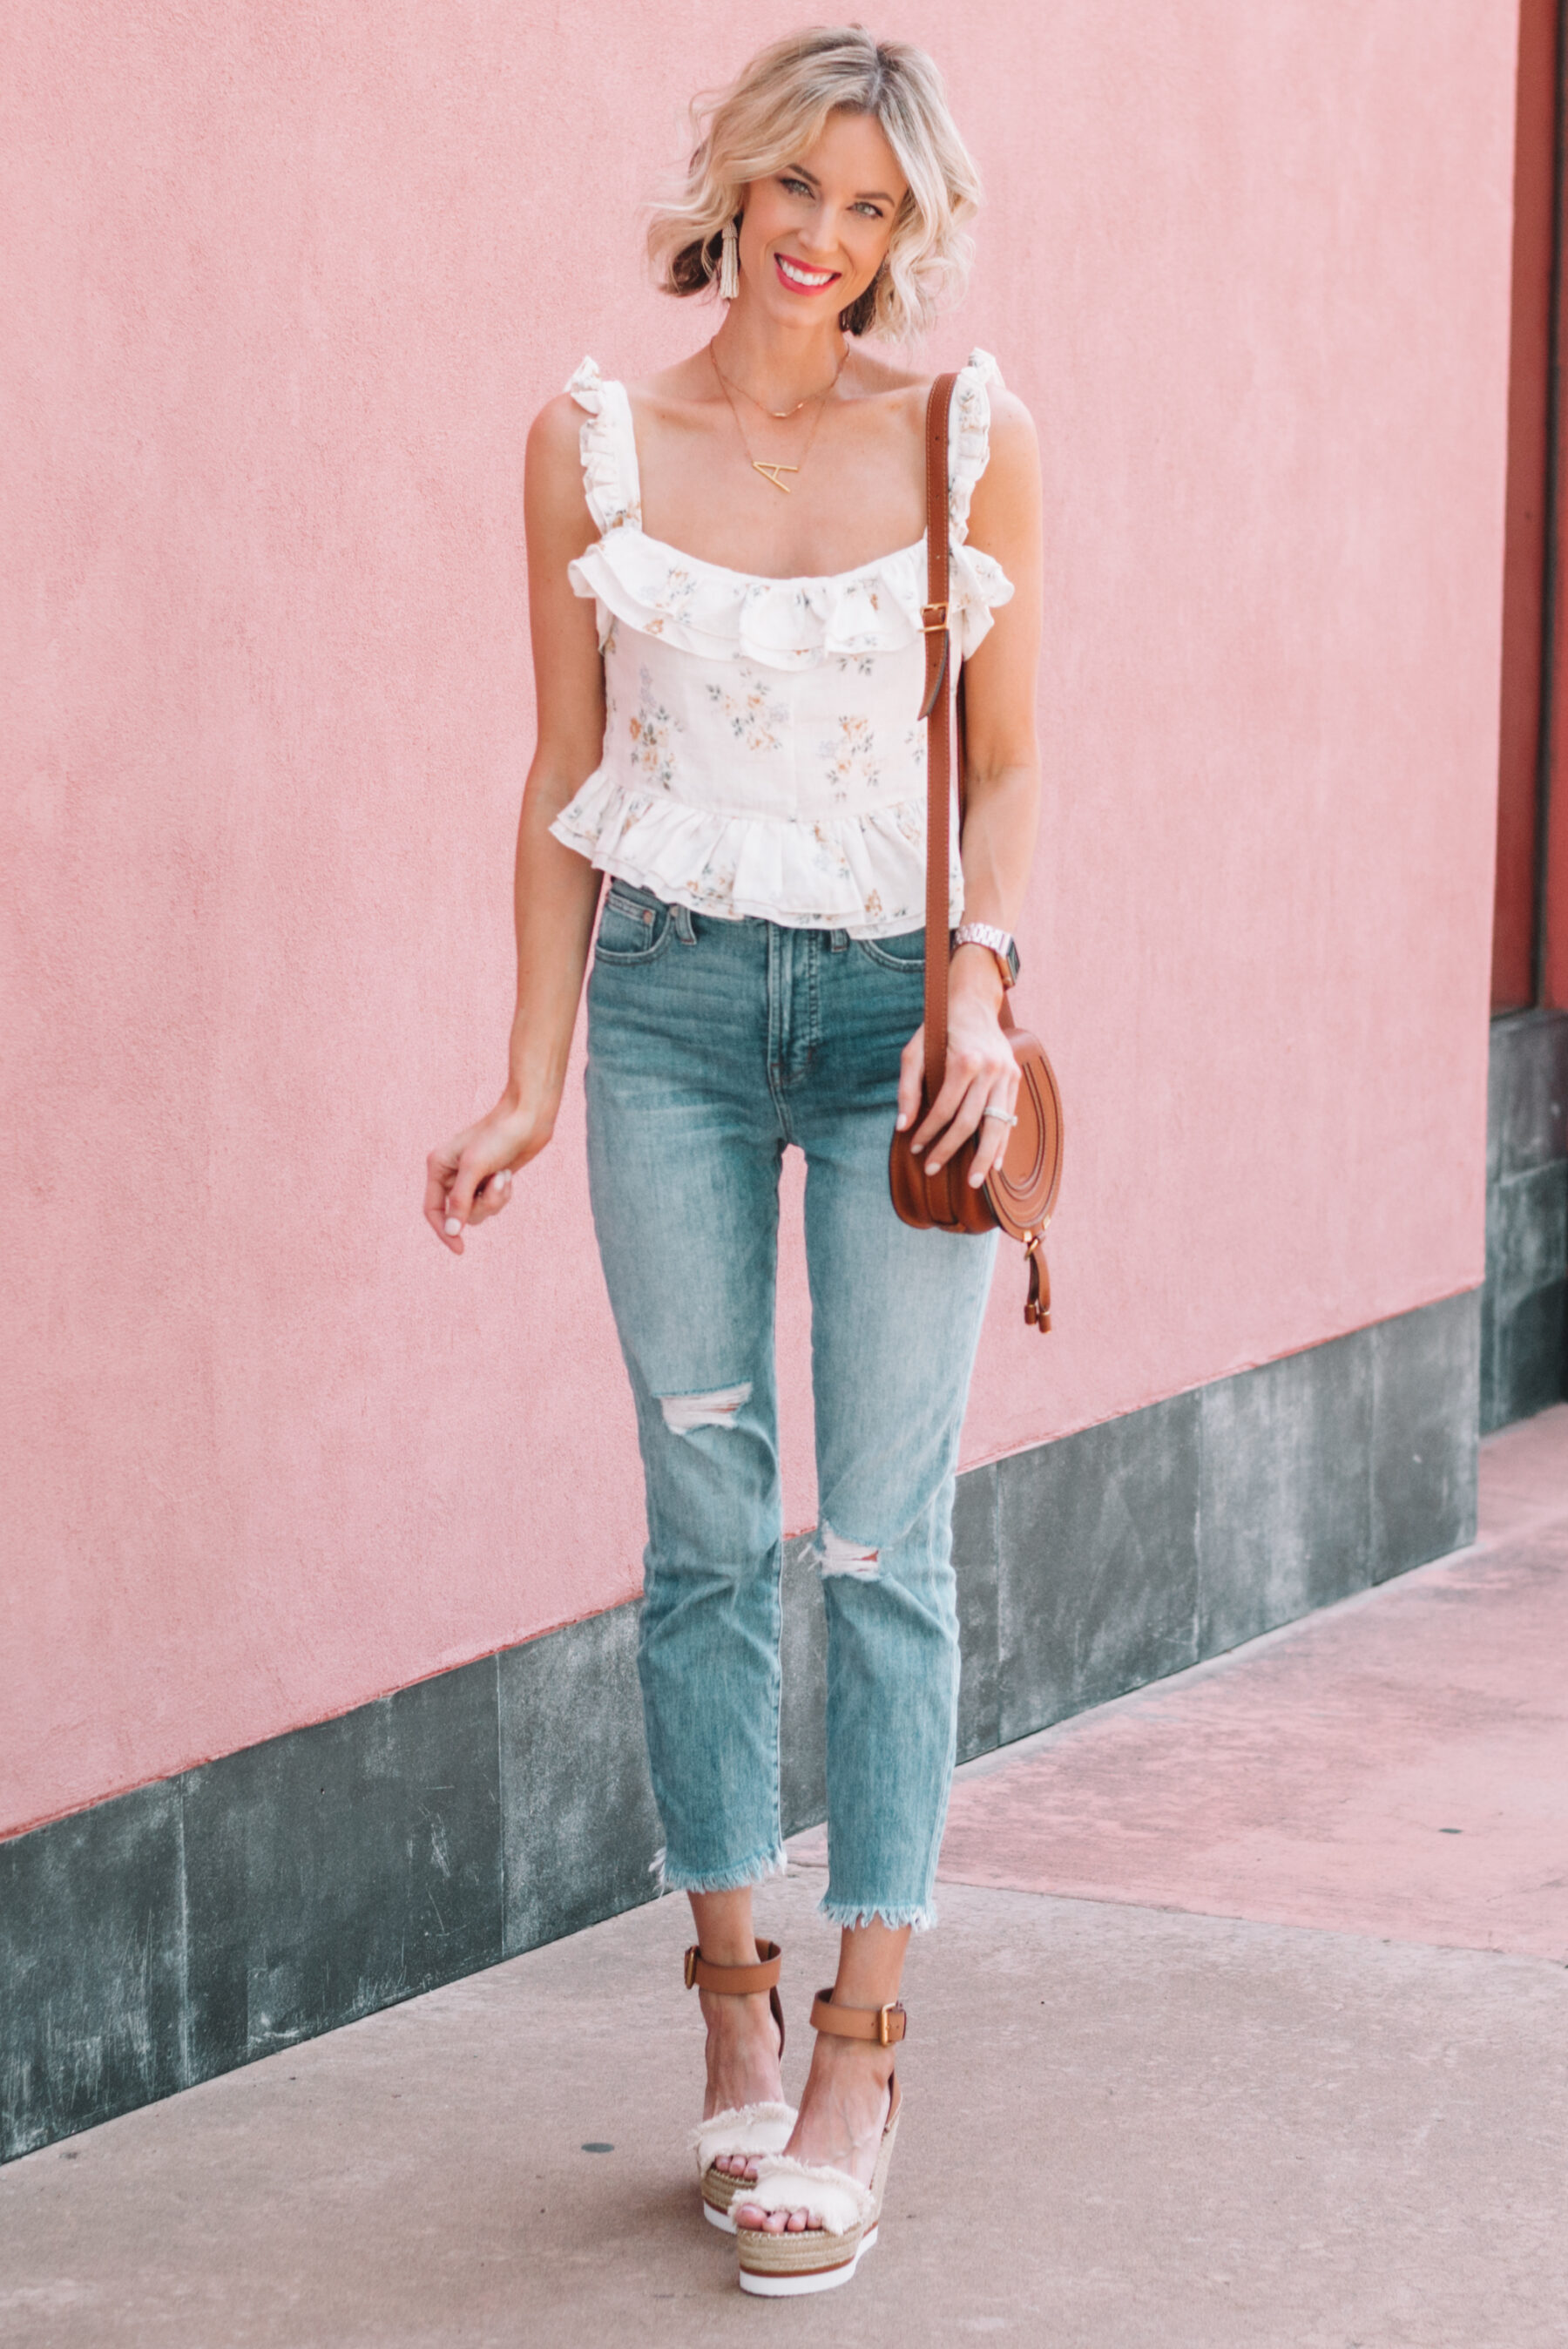 Spring Date Night Outfit Idea Straight A Style